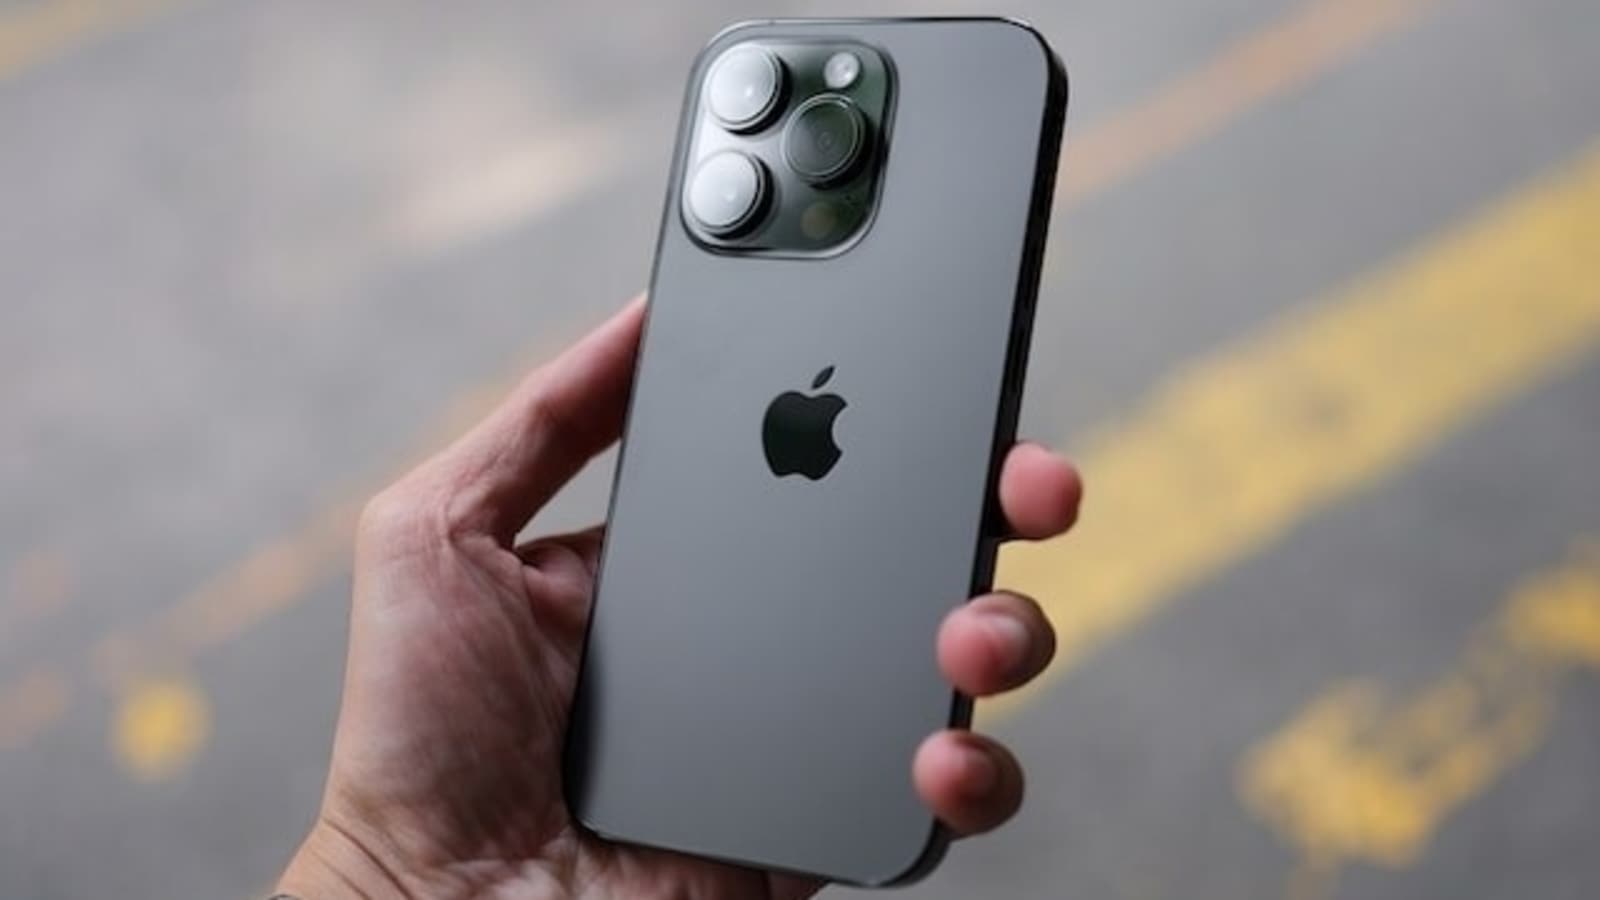 Apple iPhone 14 Pro and iPhone 14 Pro Max leak reveals another